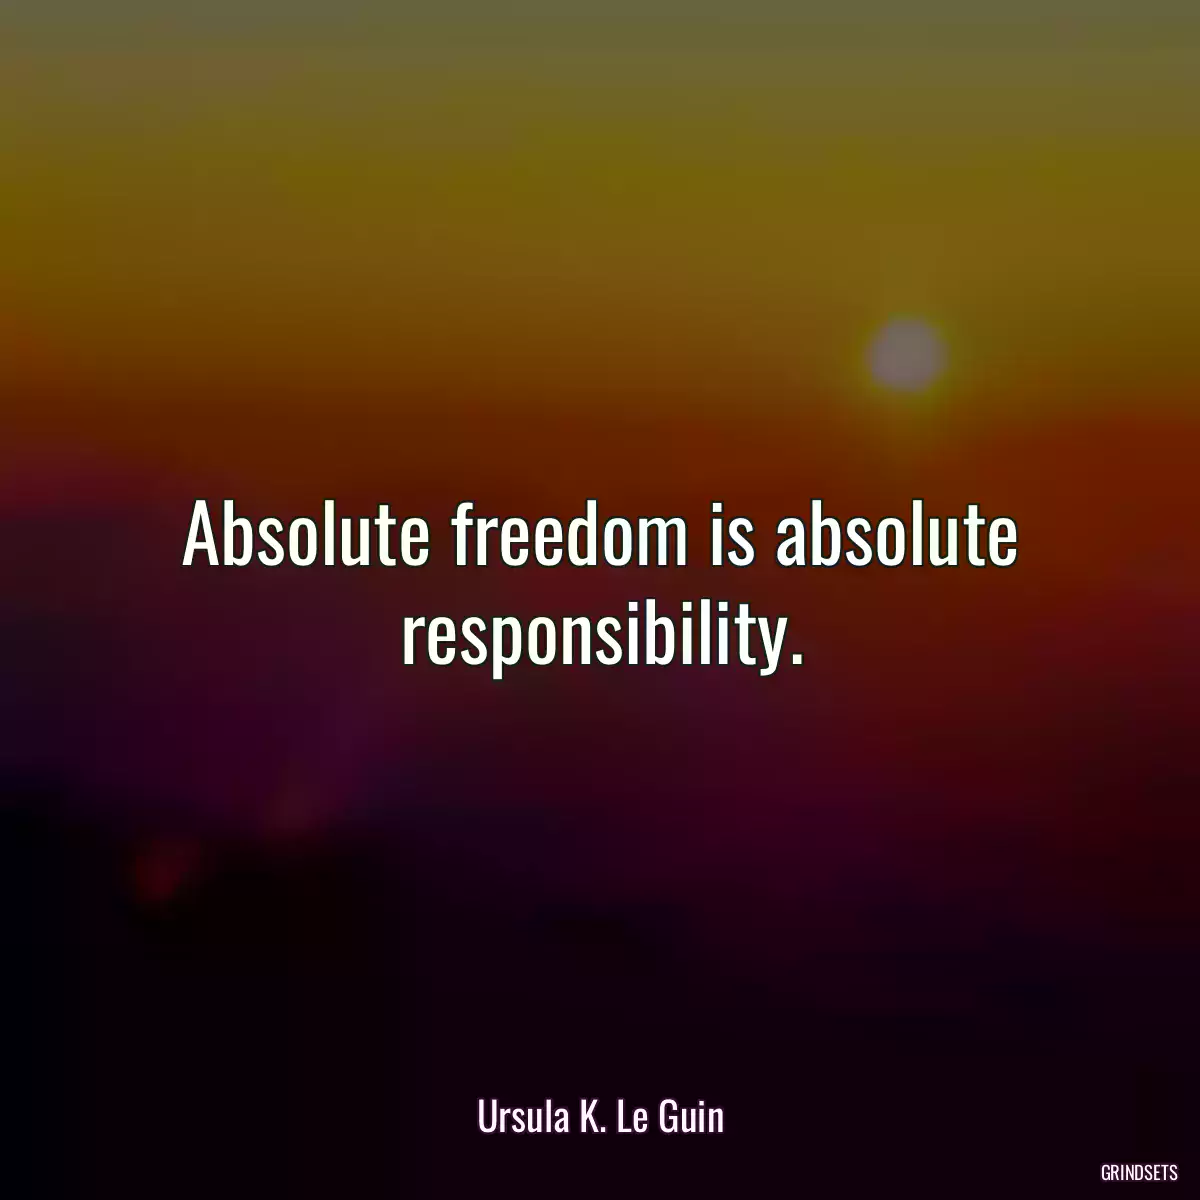 Absolute freedom is absolute responsibility.